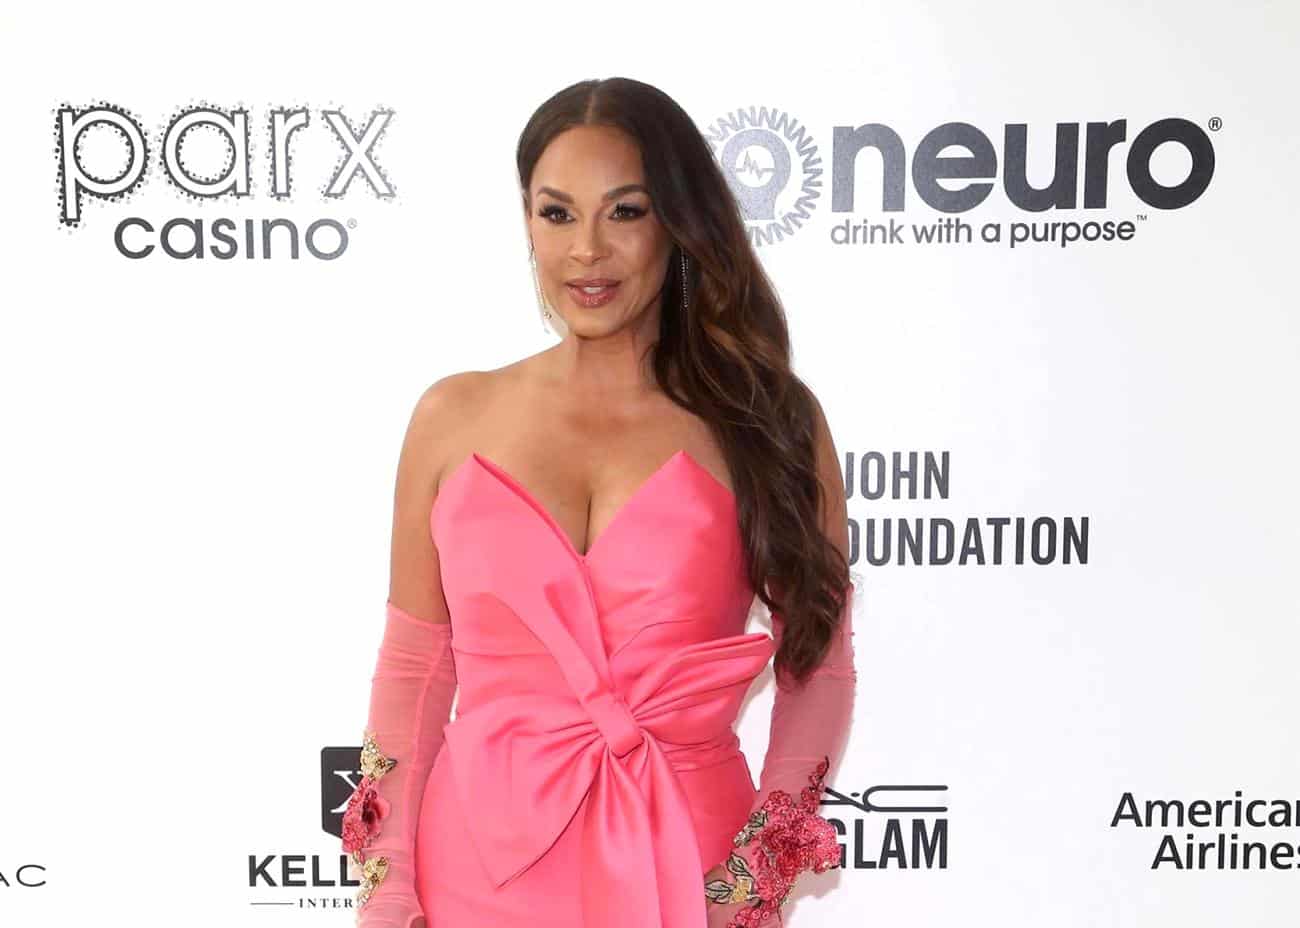 Sheree Zampino on Being Hesitant to Join RHOBH, FBI and Rat Bite Rumors and Not Liking Erika Before Joining Show, Plus Talks Kyle, Aspen Trip, and Will Smith Update